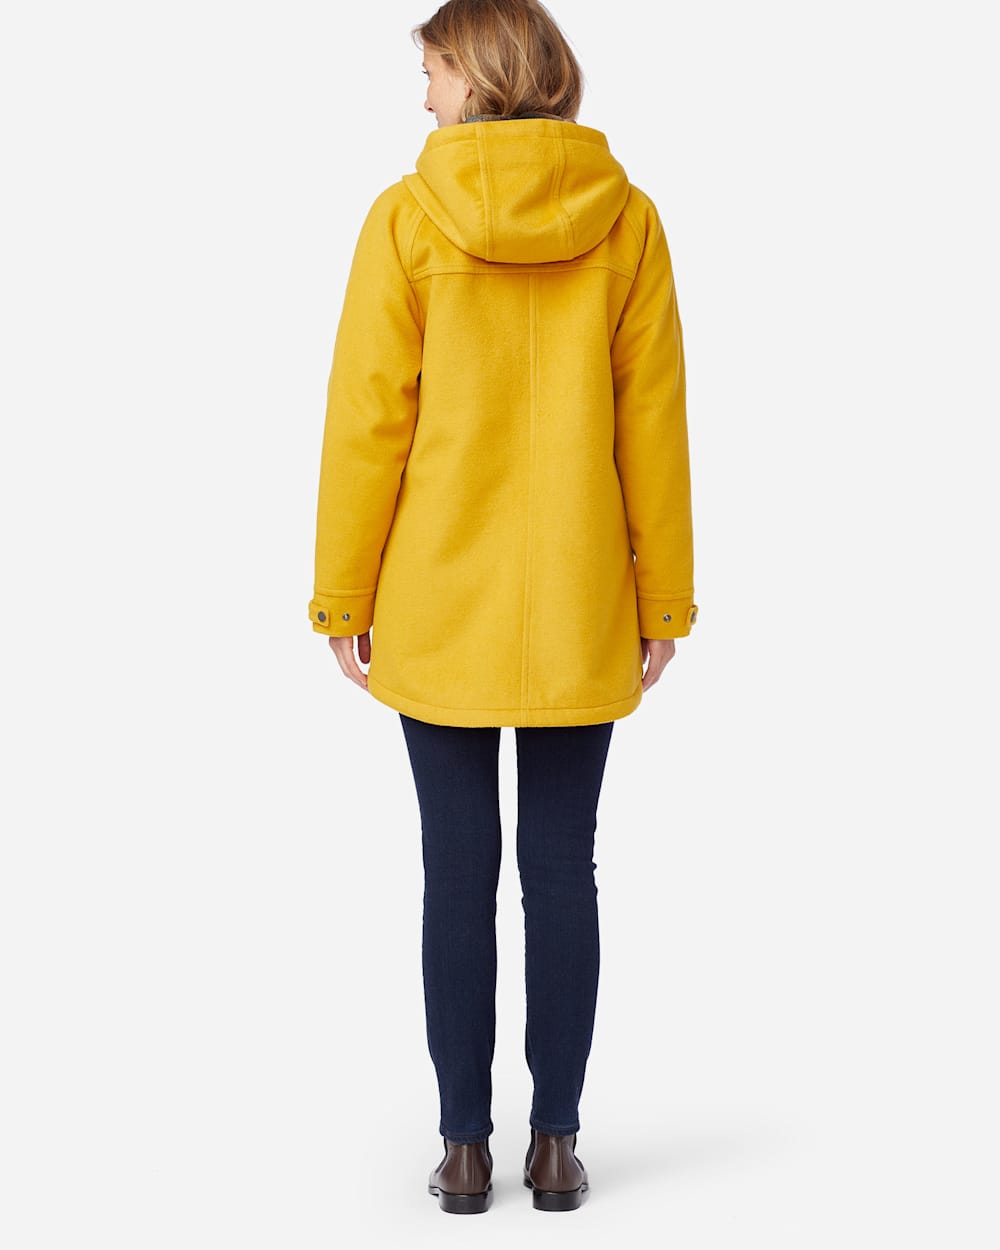 ALTERNATE VIEW OF WOMEN'S WEST HAVEN INSULATED COAT IN GOLDENROD image number 3